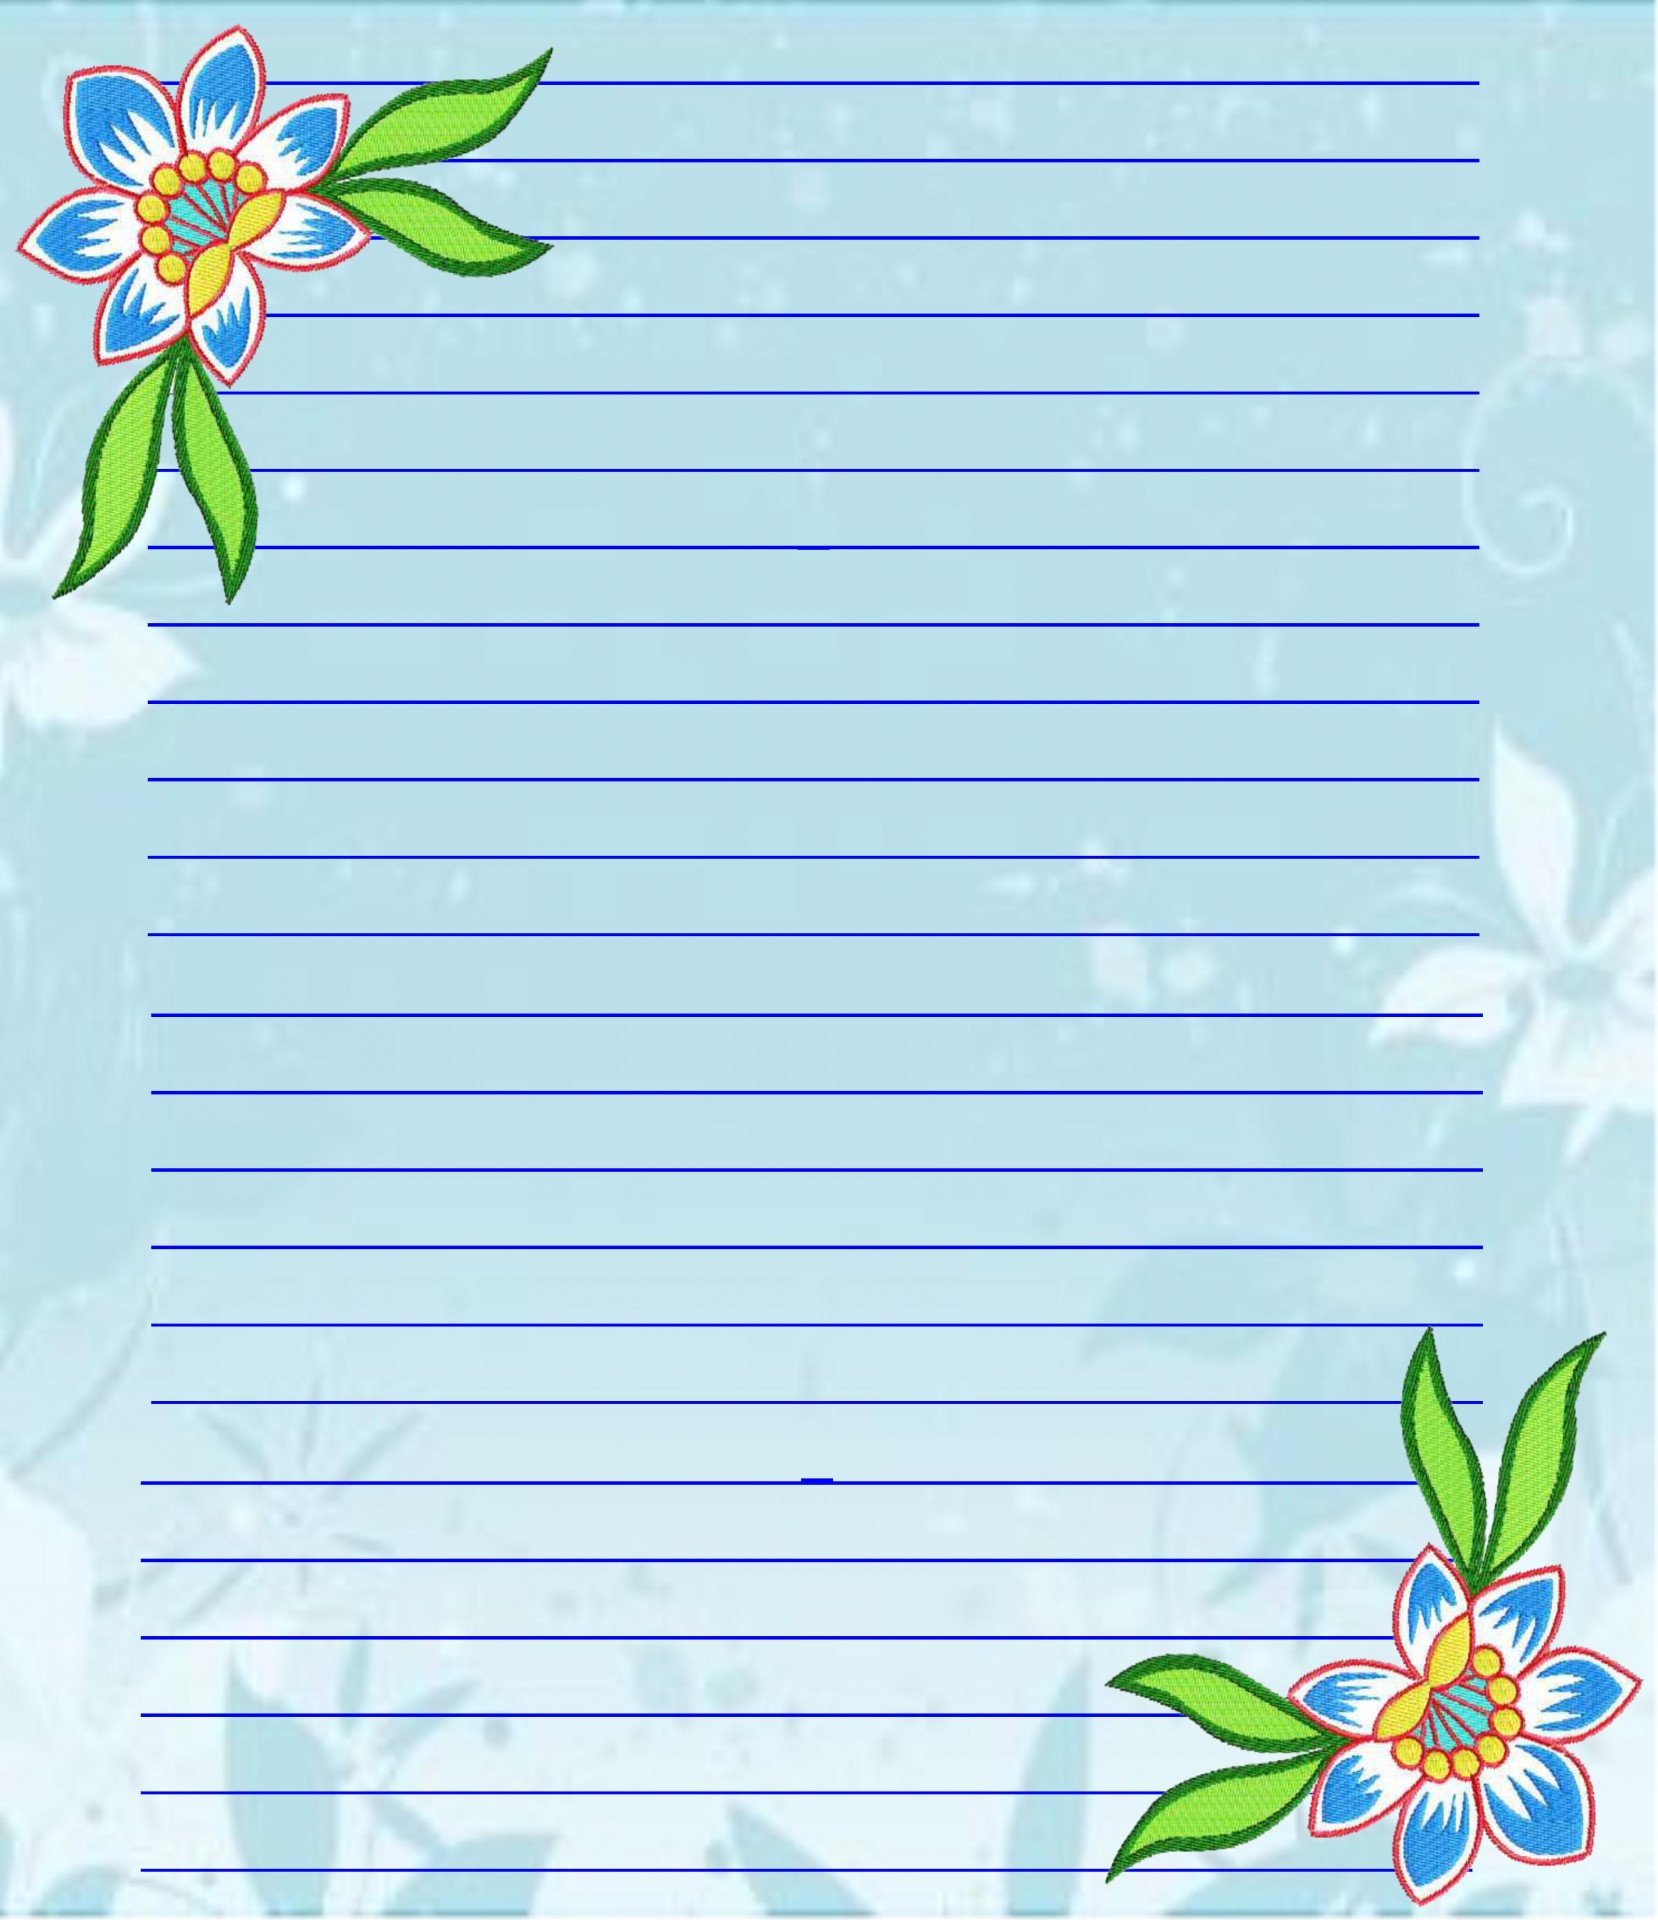 stationery-paper-collection-3-free-stock-photo-public-domain-pictures